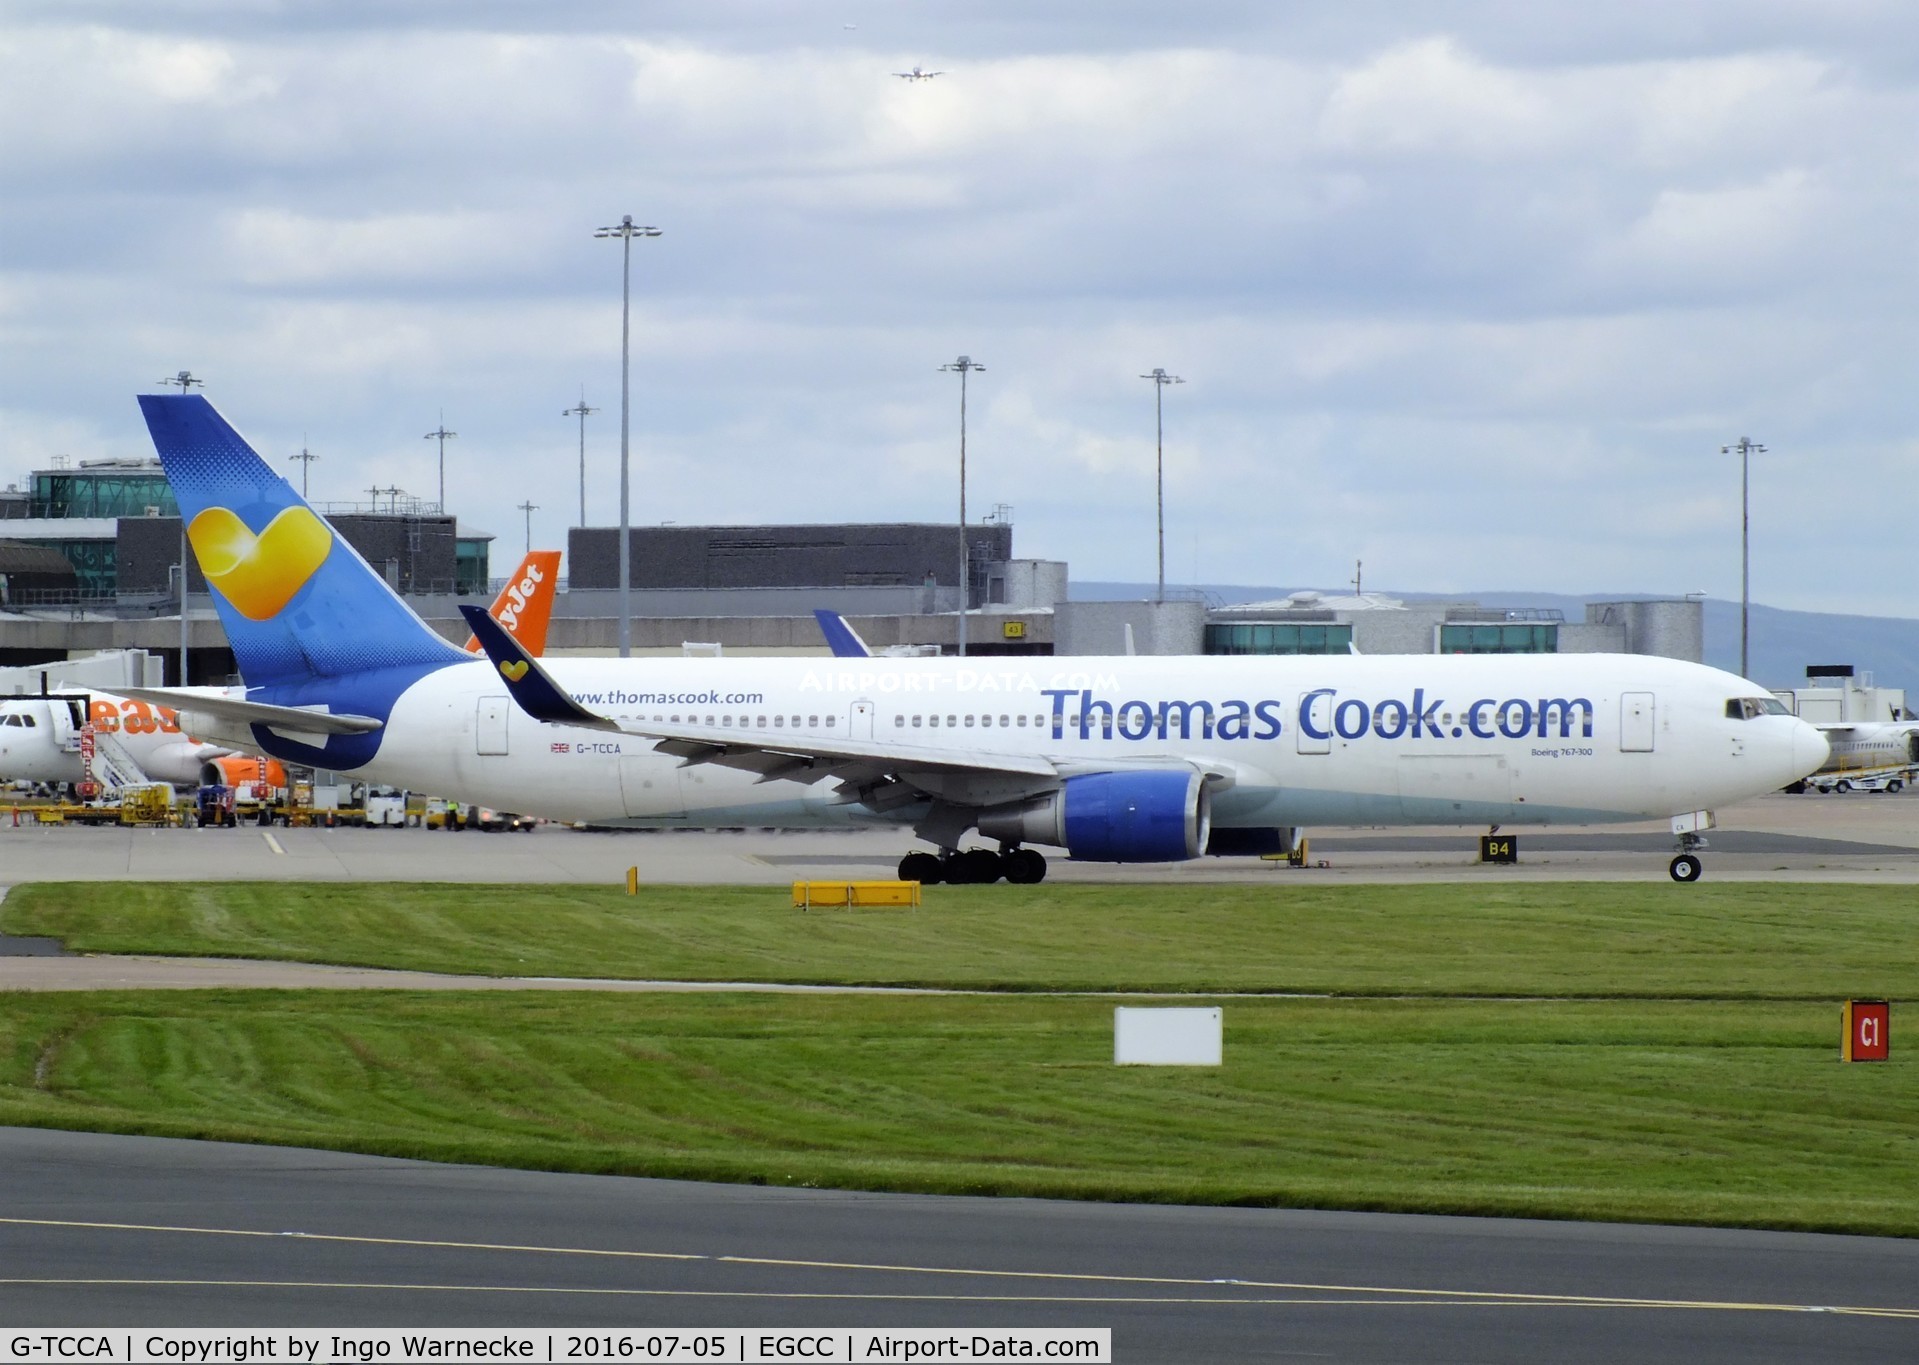 G-TCCA, 1994 Boeing 767-31K C/N 27205, Boeing 767-31K of Thomas Cook at Manchester airport